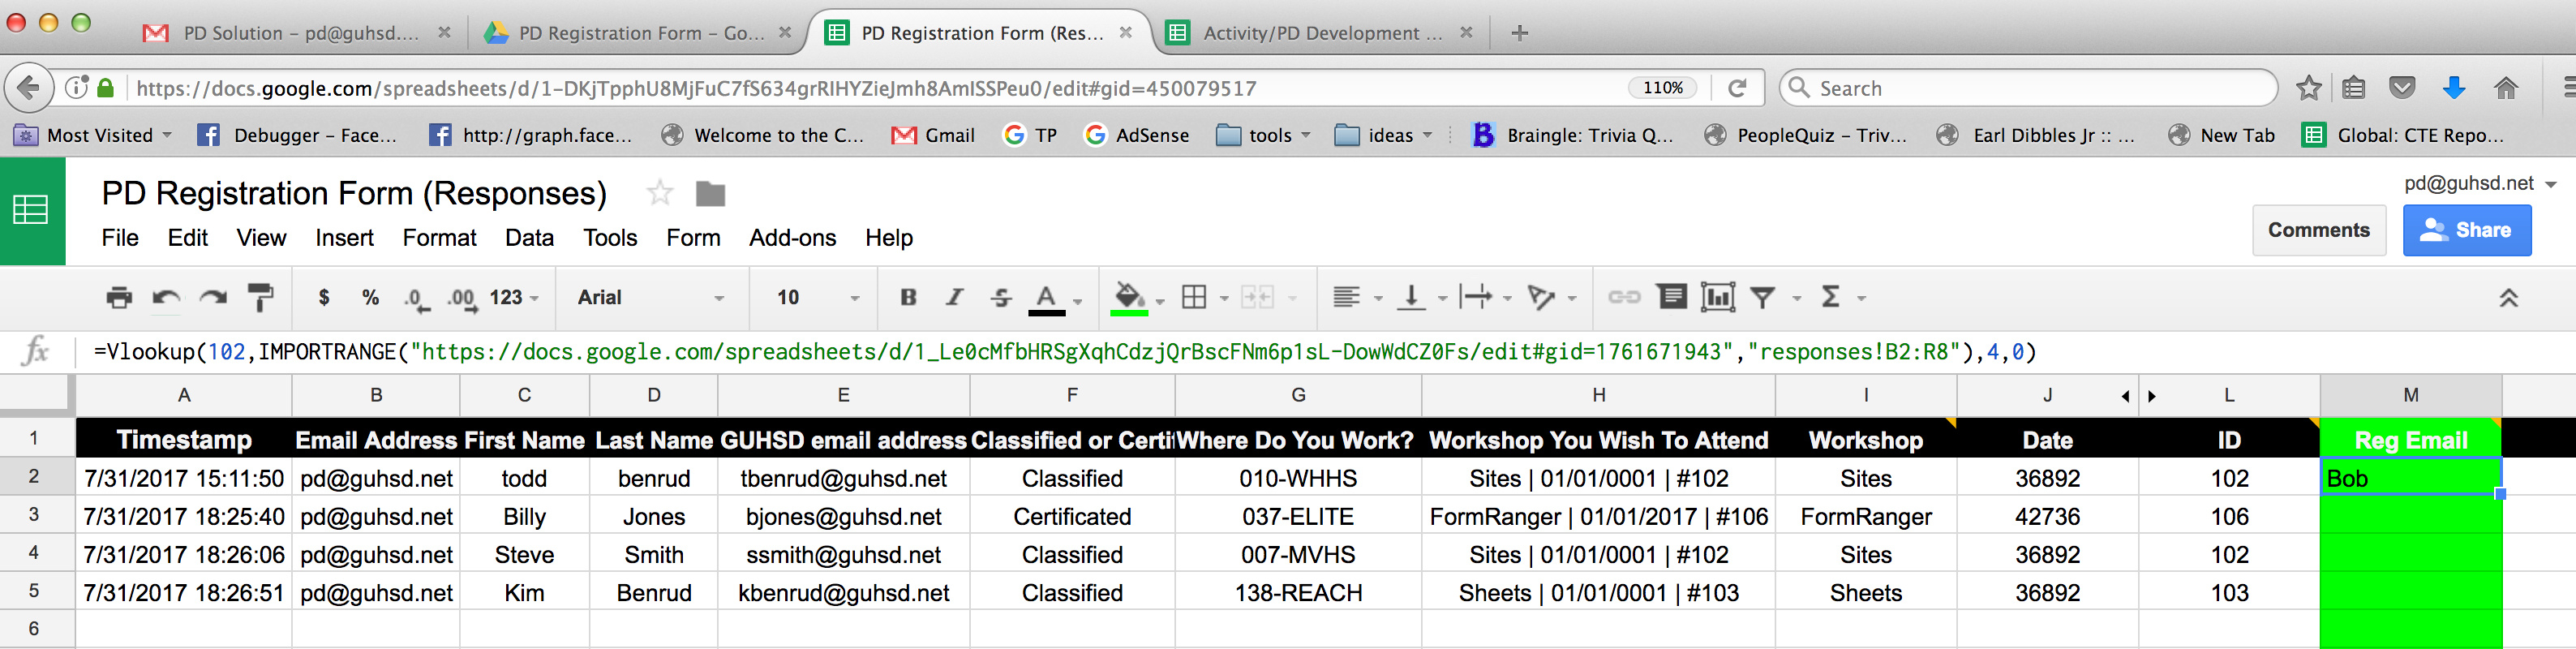 Http Docs Google Com Spreadsheet View Form With Www Https Docs Google Com Spreadsheet Viewform  Spreadsheet Collections